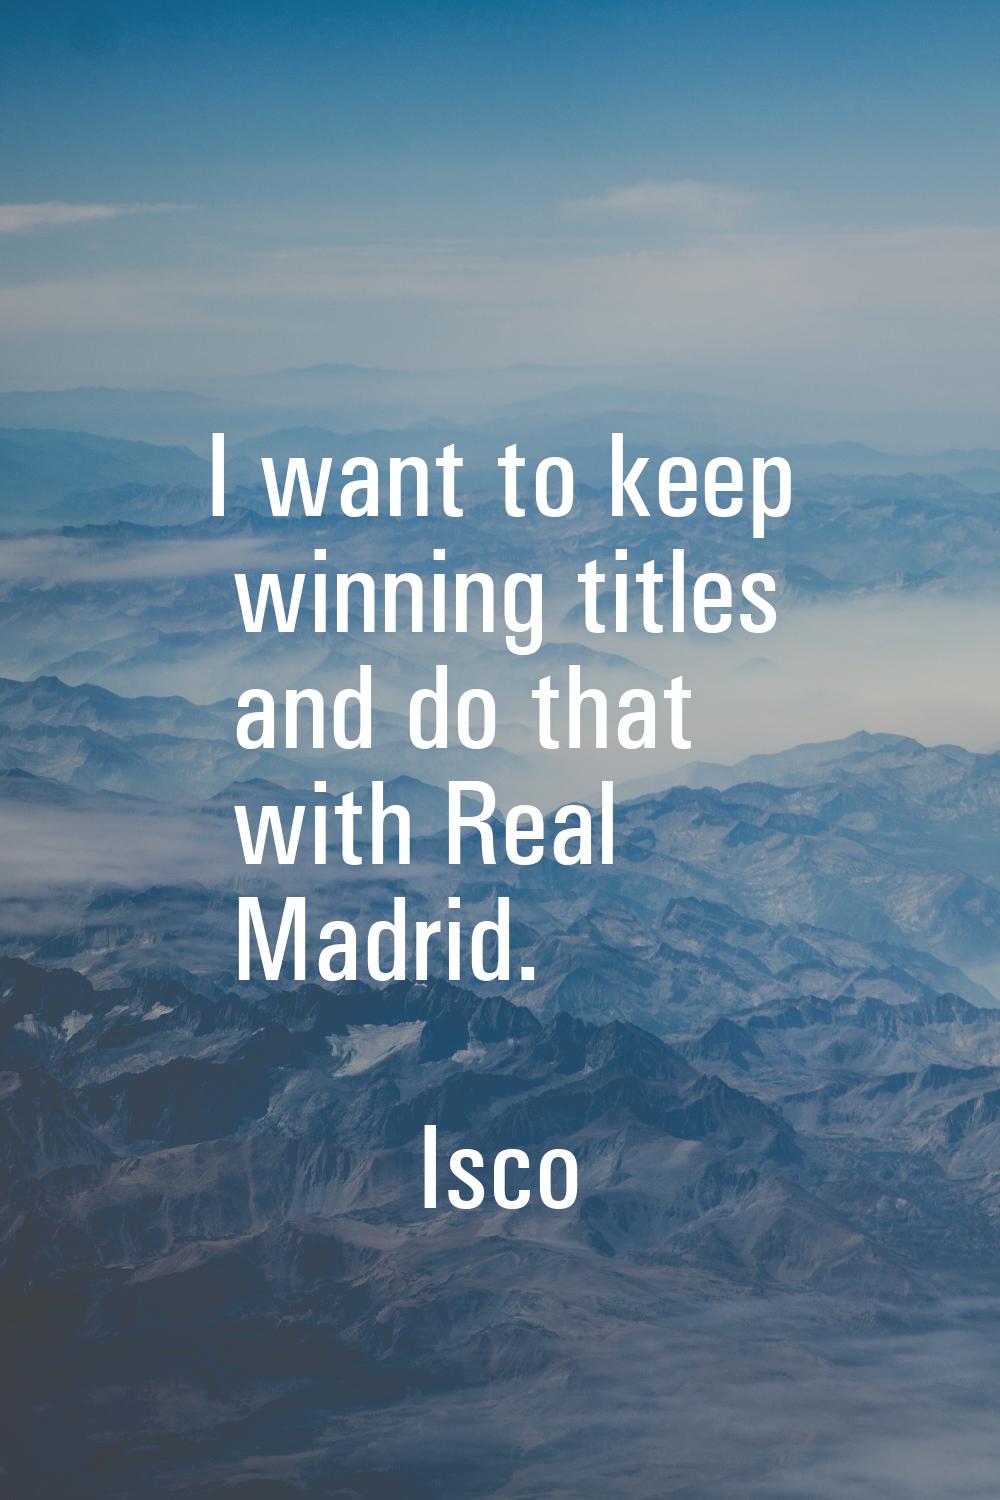 I want to keep winning titles and do that with Real Madrid.